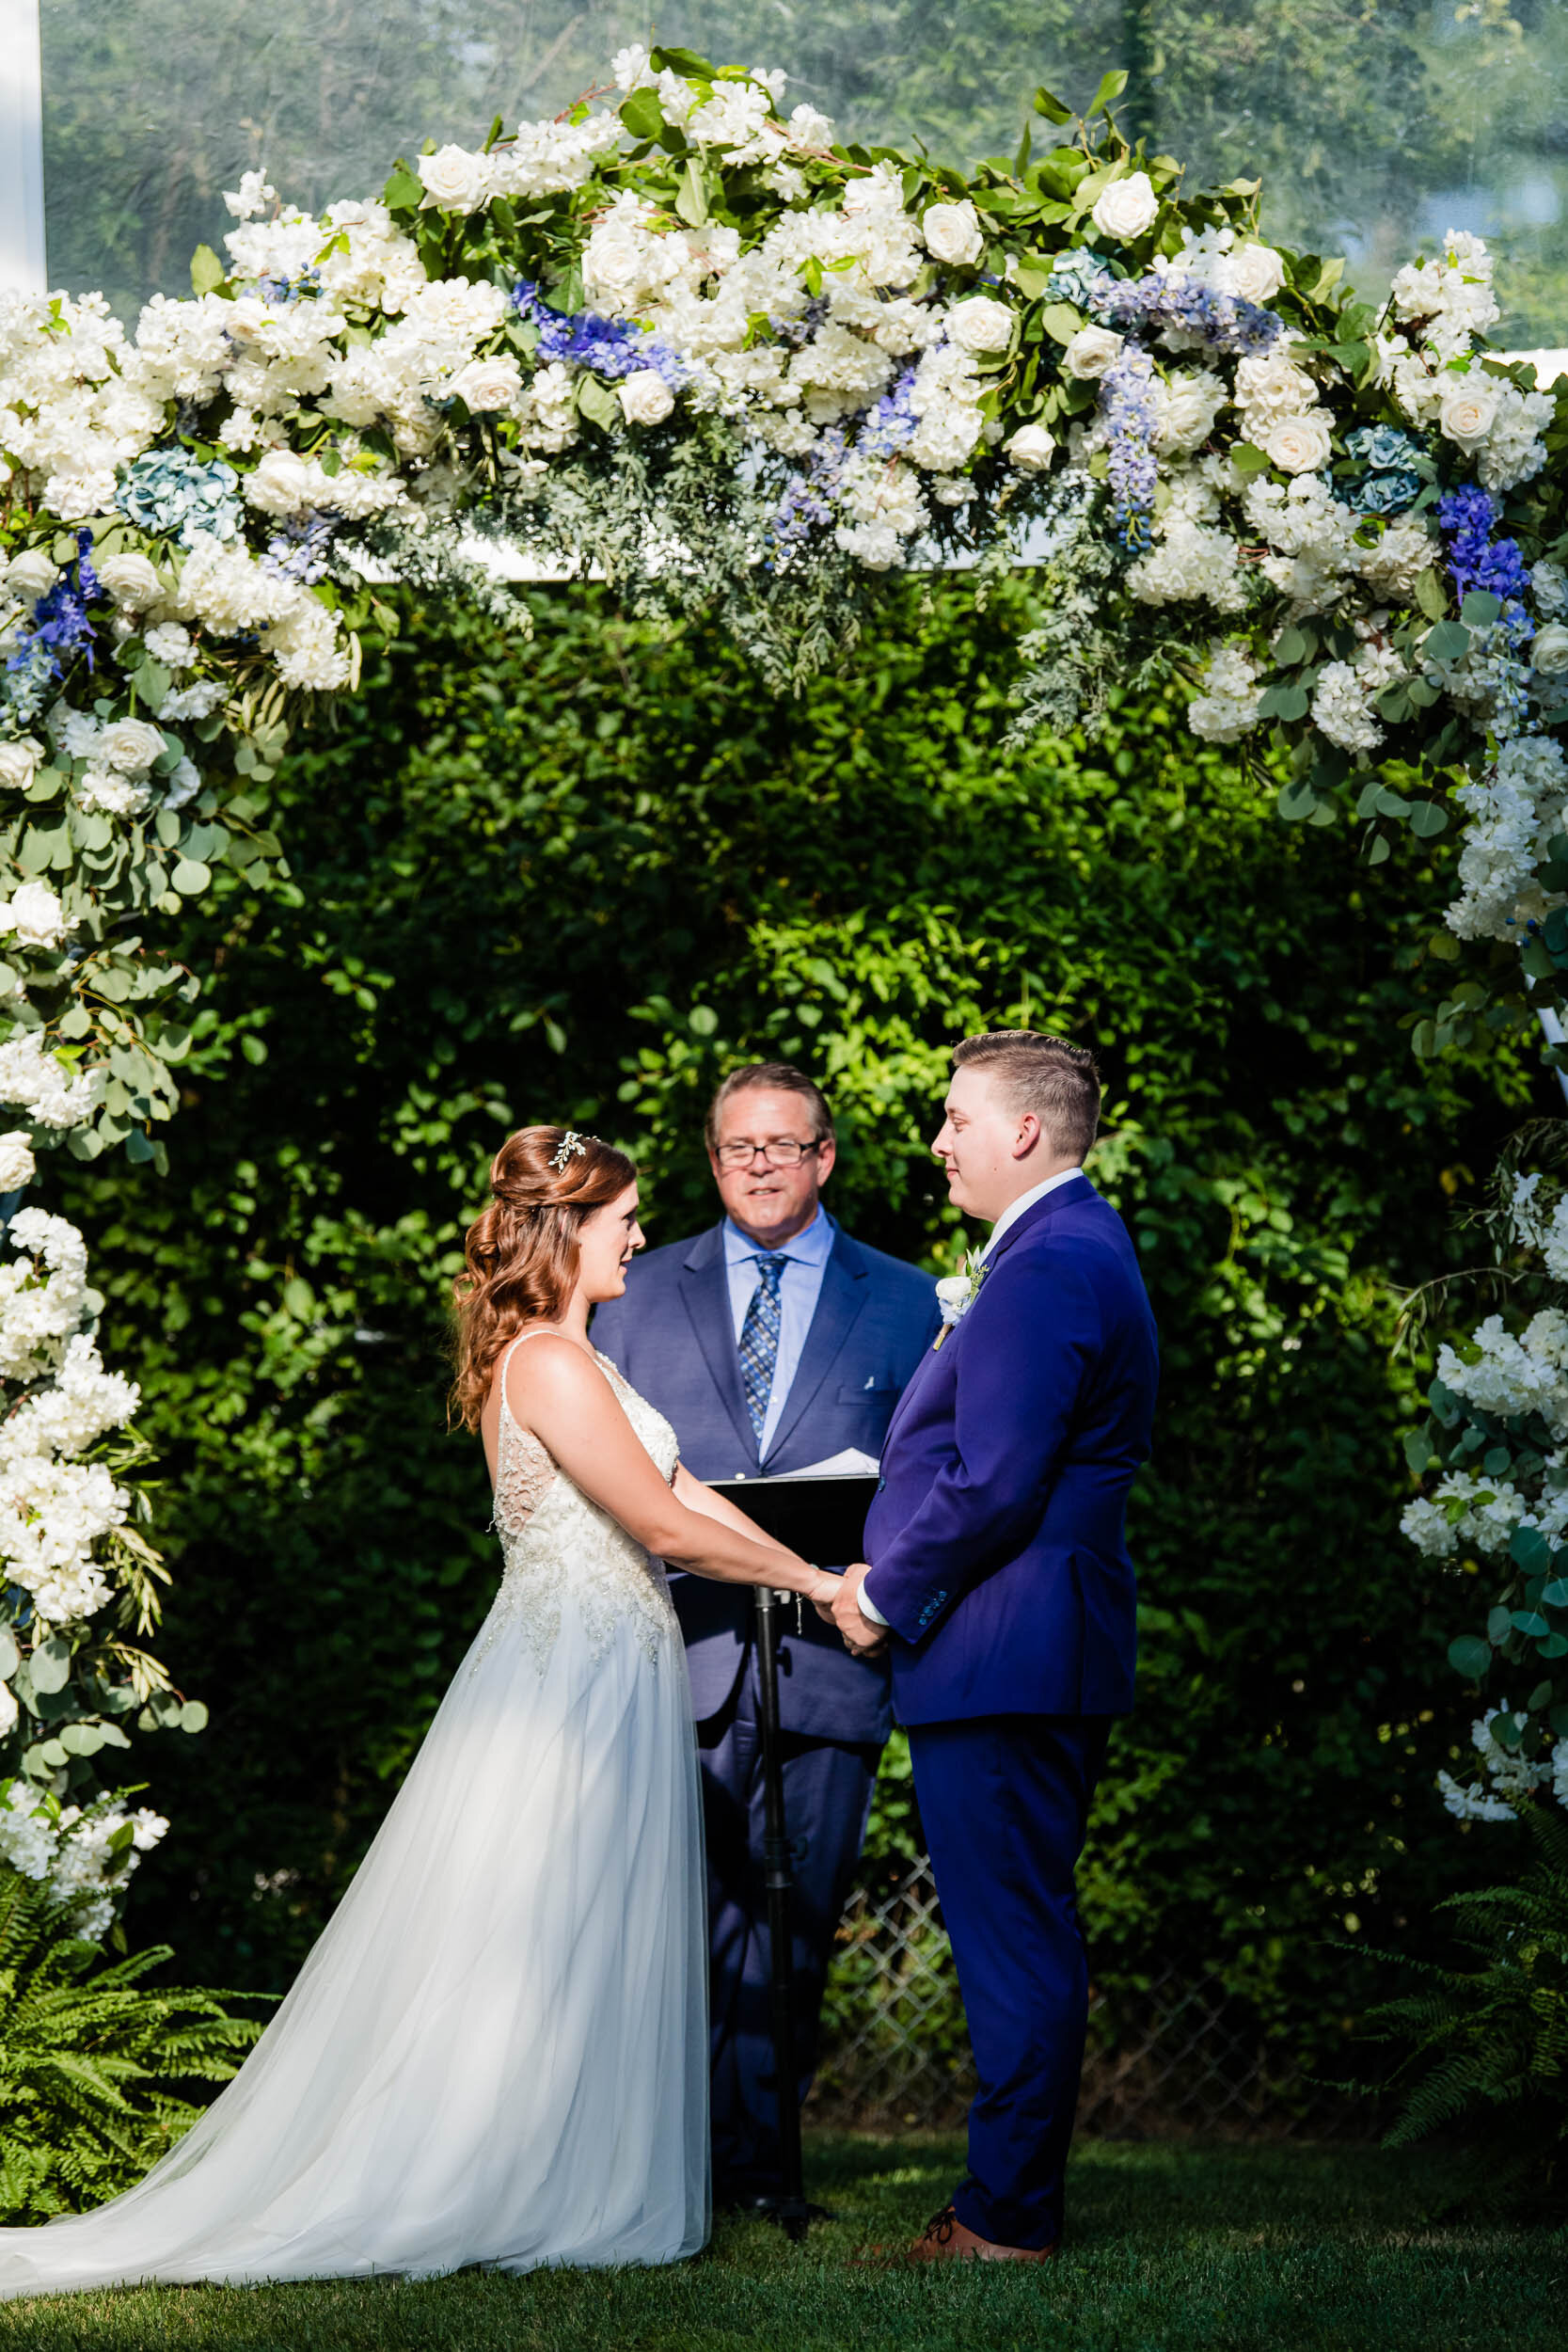 Bride and groom under the floral arch during their ceremony:  Chicago backyard wedding photographed by J. Brown Photography.